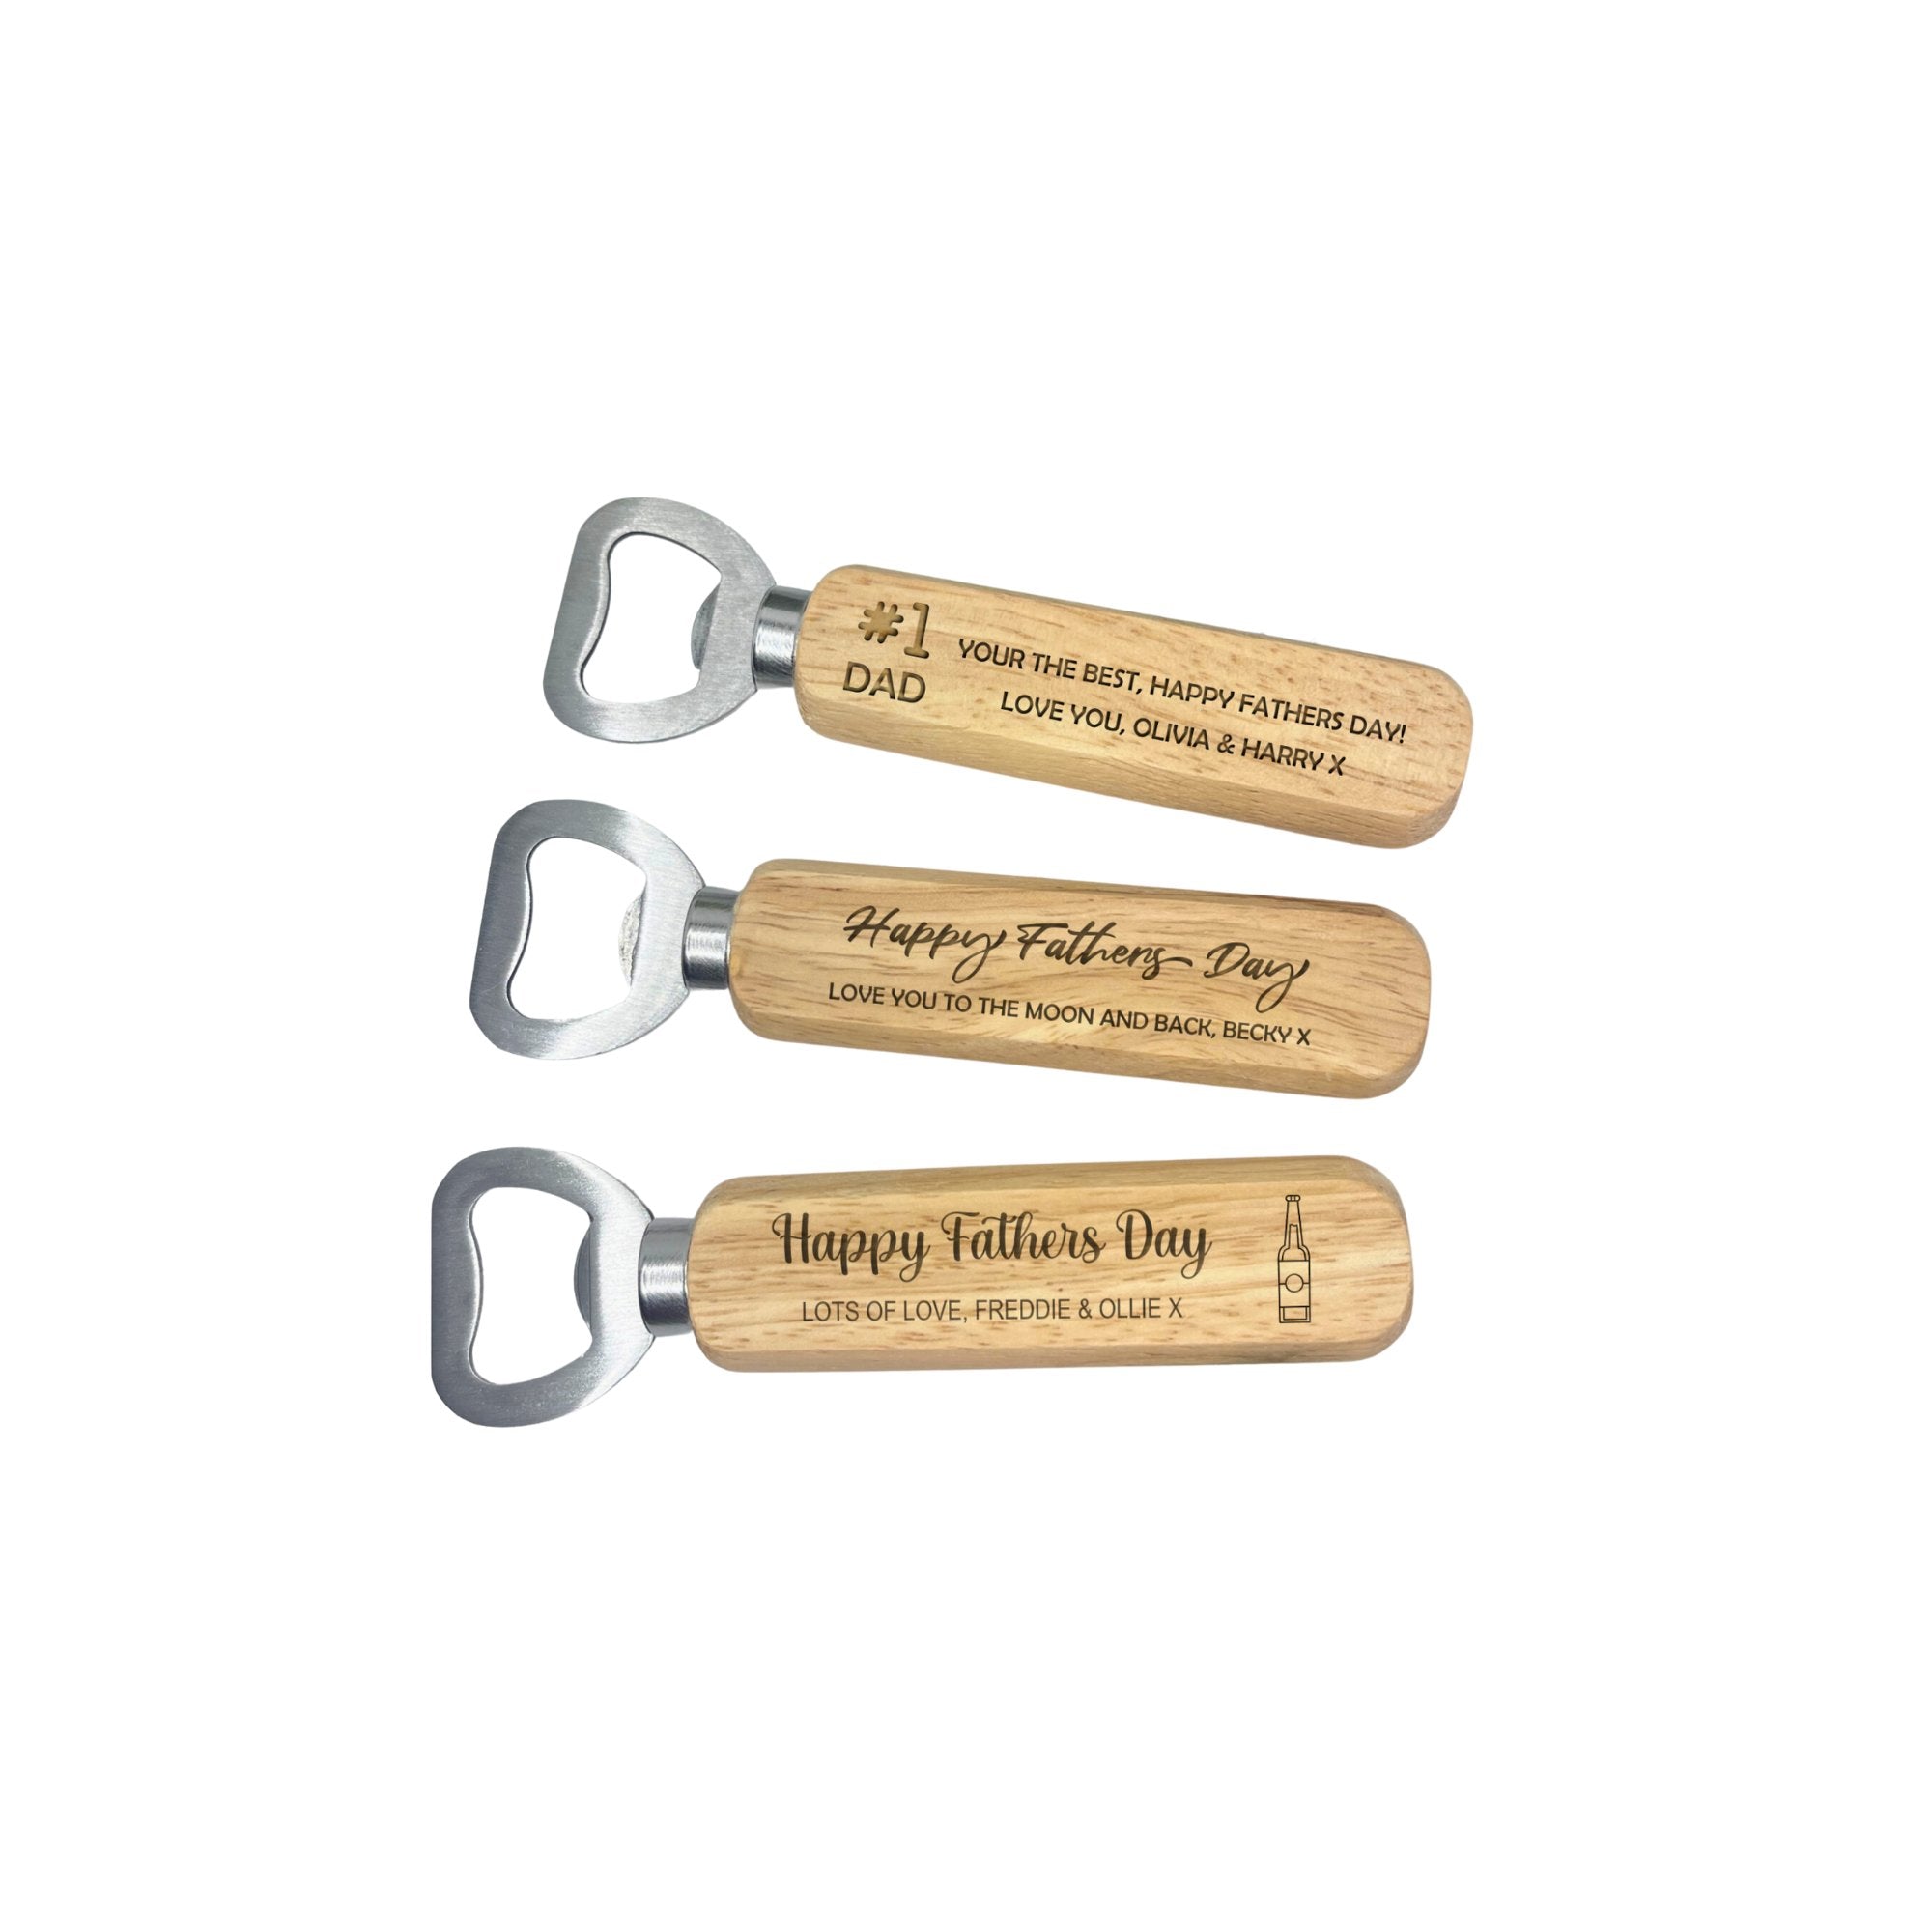 Explore unique and thoughtful Father's Day gifts like our custom wooden bottle opener, personalized with your dad's name and a special message.